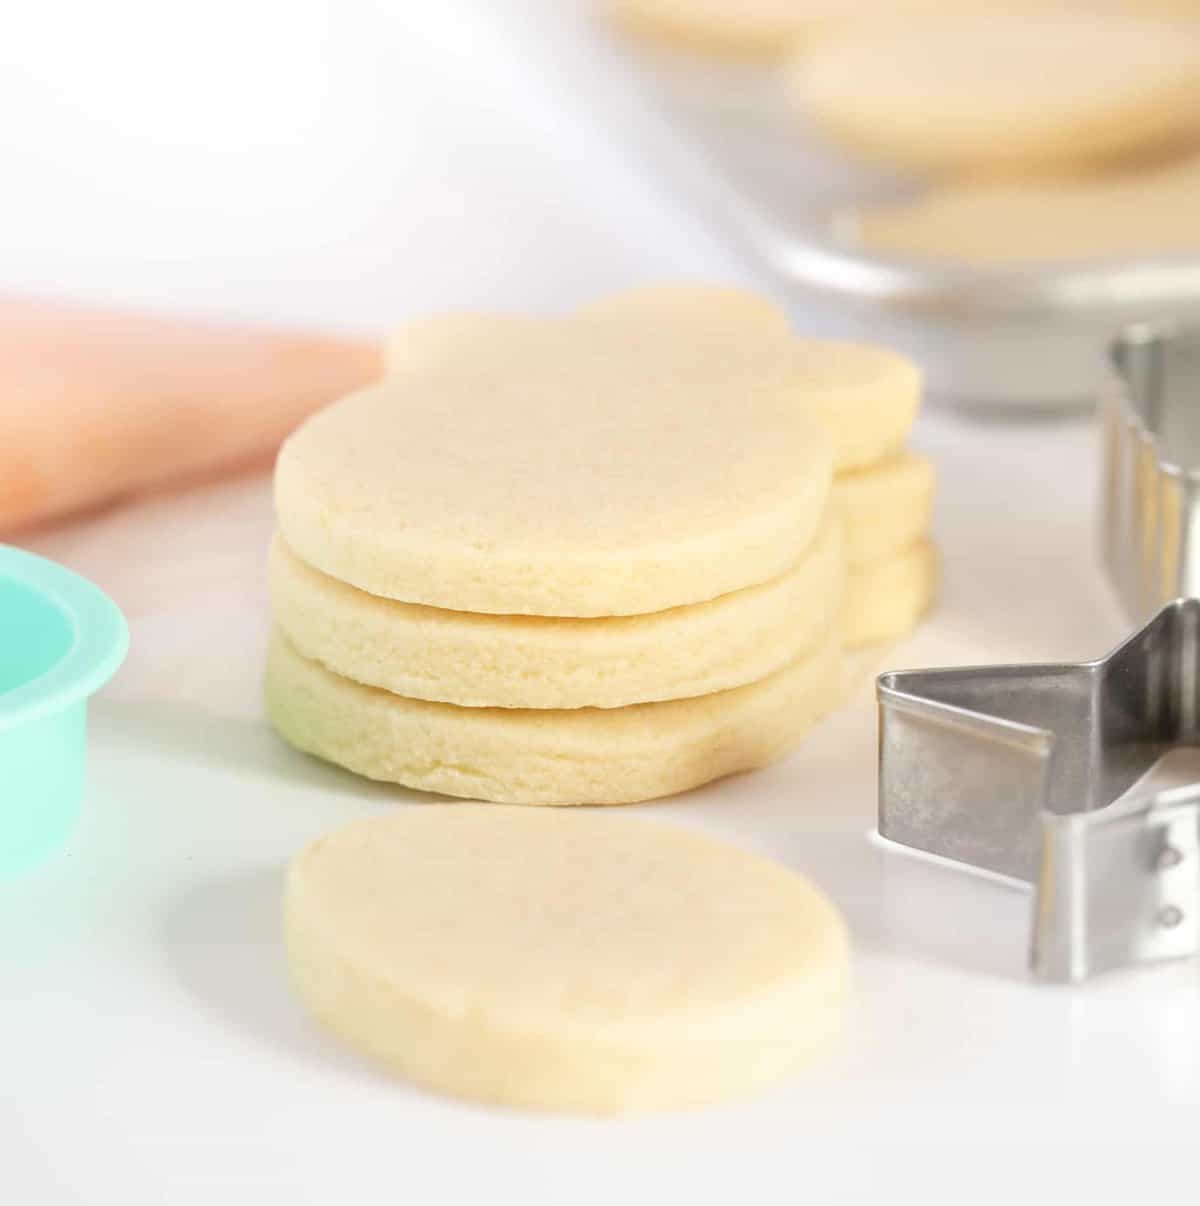 https://www.designeatrepeat.com/wp-content/uploads/cut-out-sugar-cookies-featured.jpg